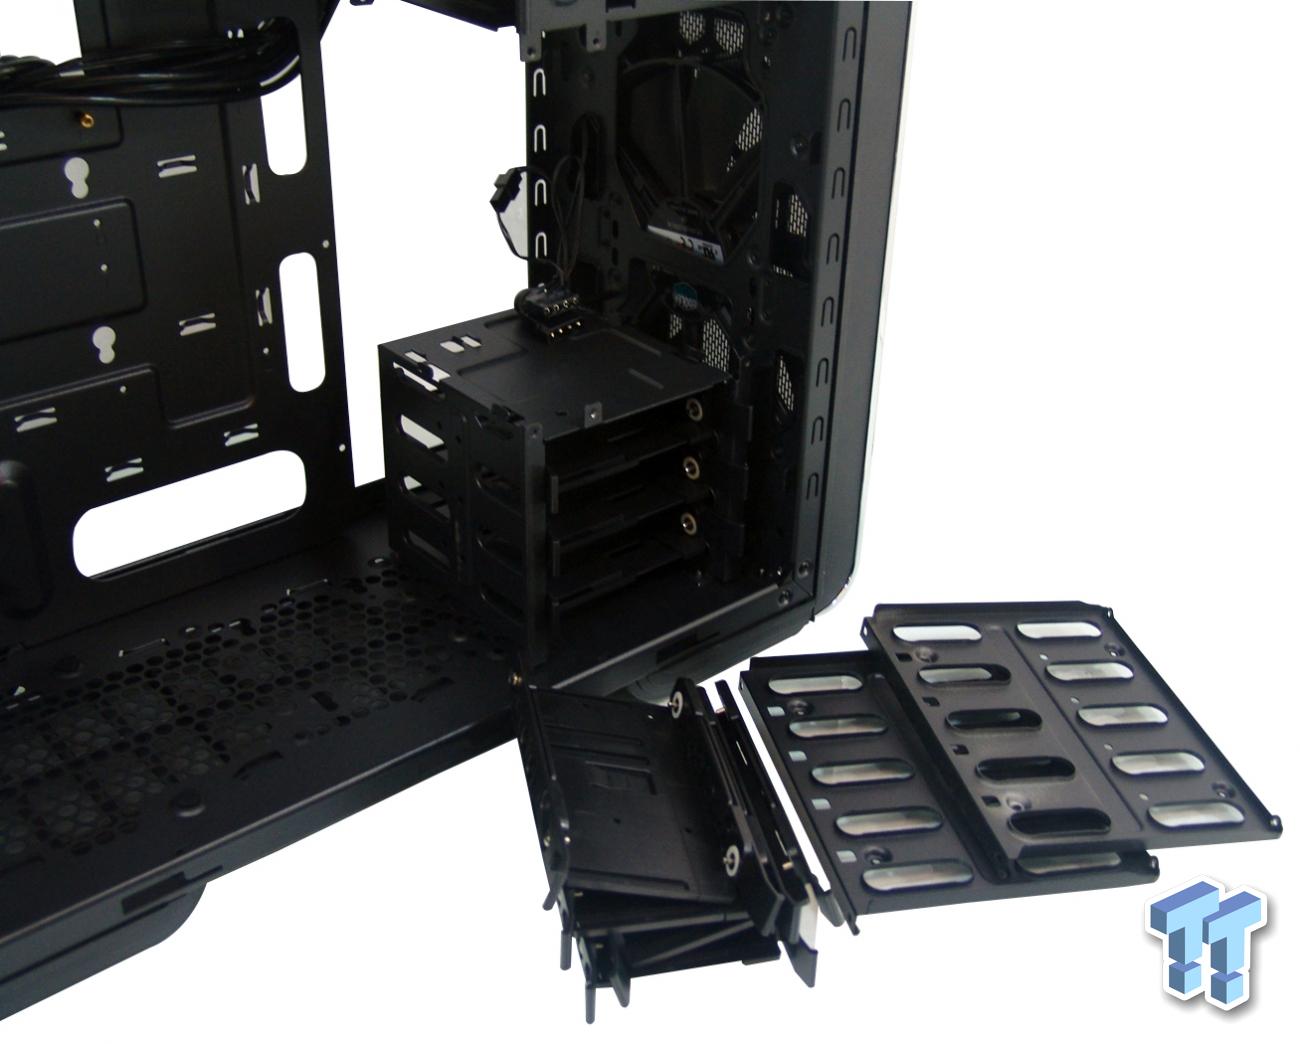 Cooler Master CM 690 III with Seidon 120 Mid-Tower Chassis Review 